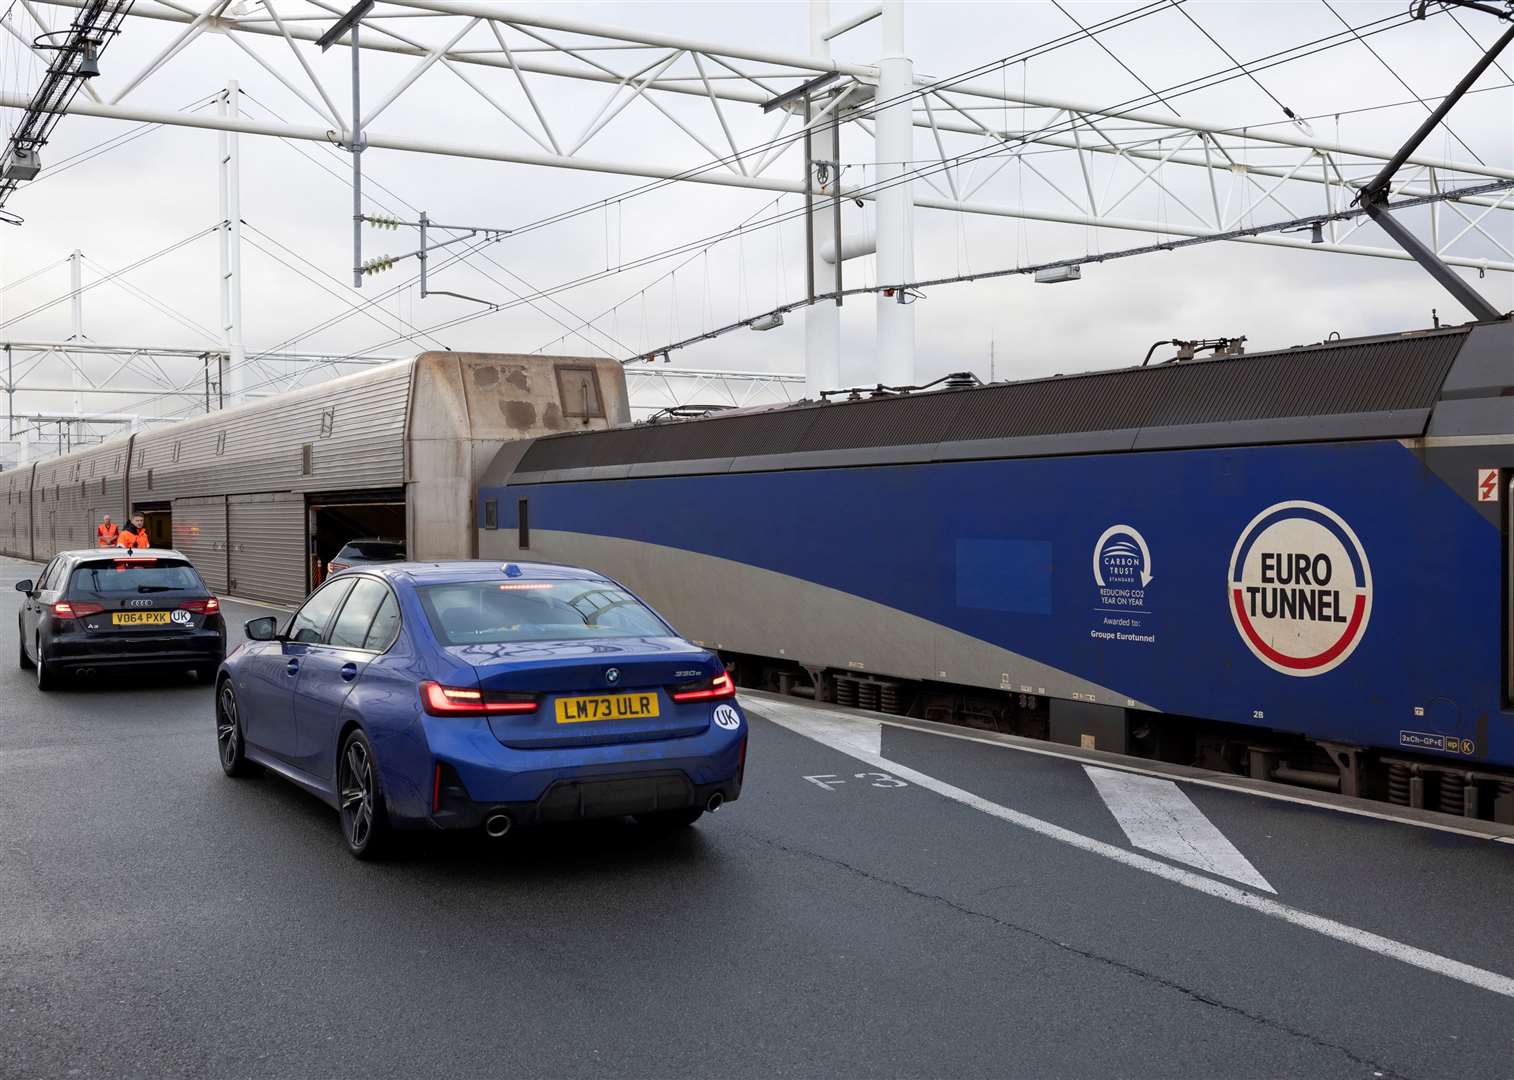 Eurotunnel has been shuttling passengers between Britain and France for 30 years. Picture: Julien Knaub - Eurotunnel